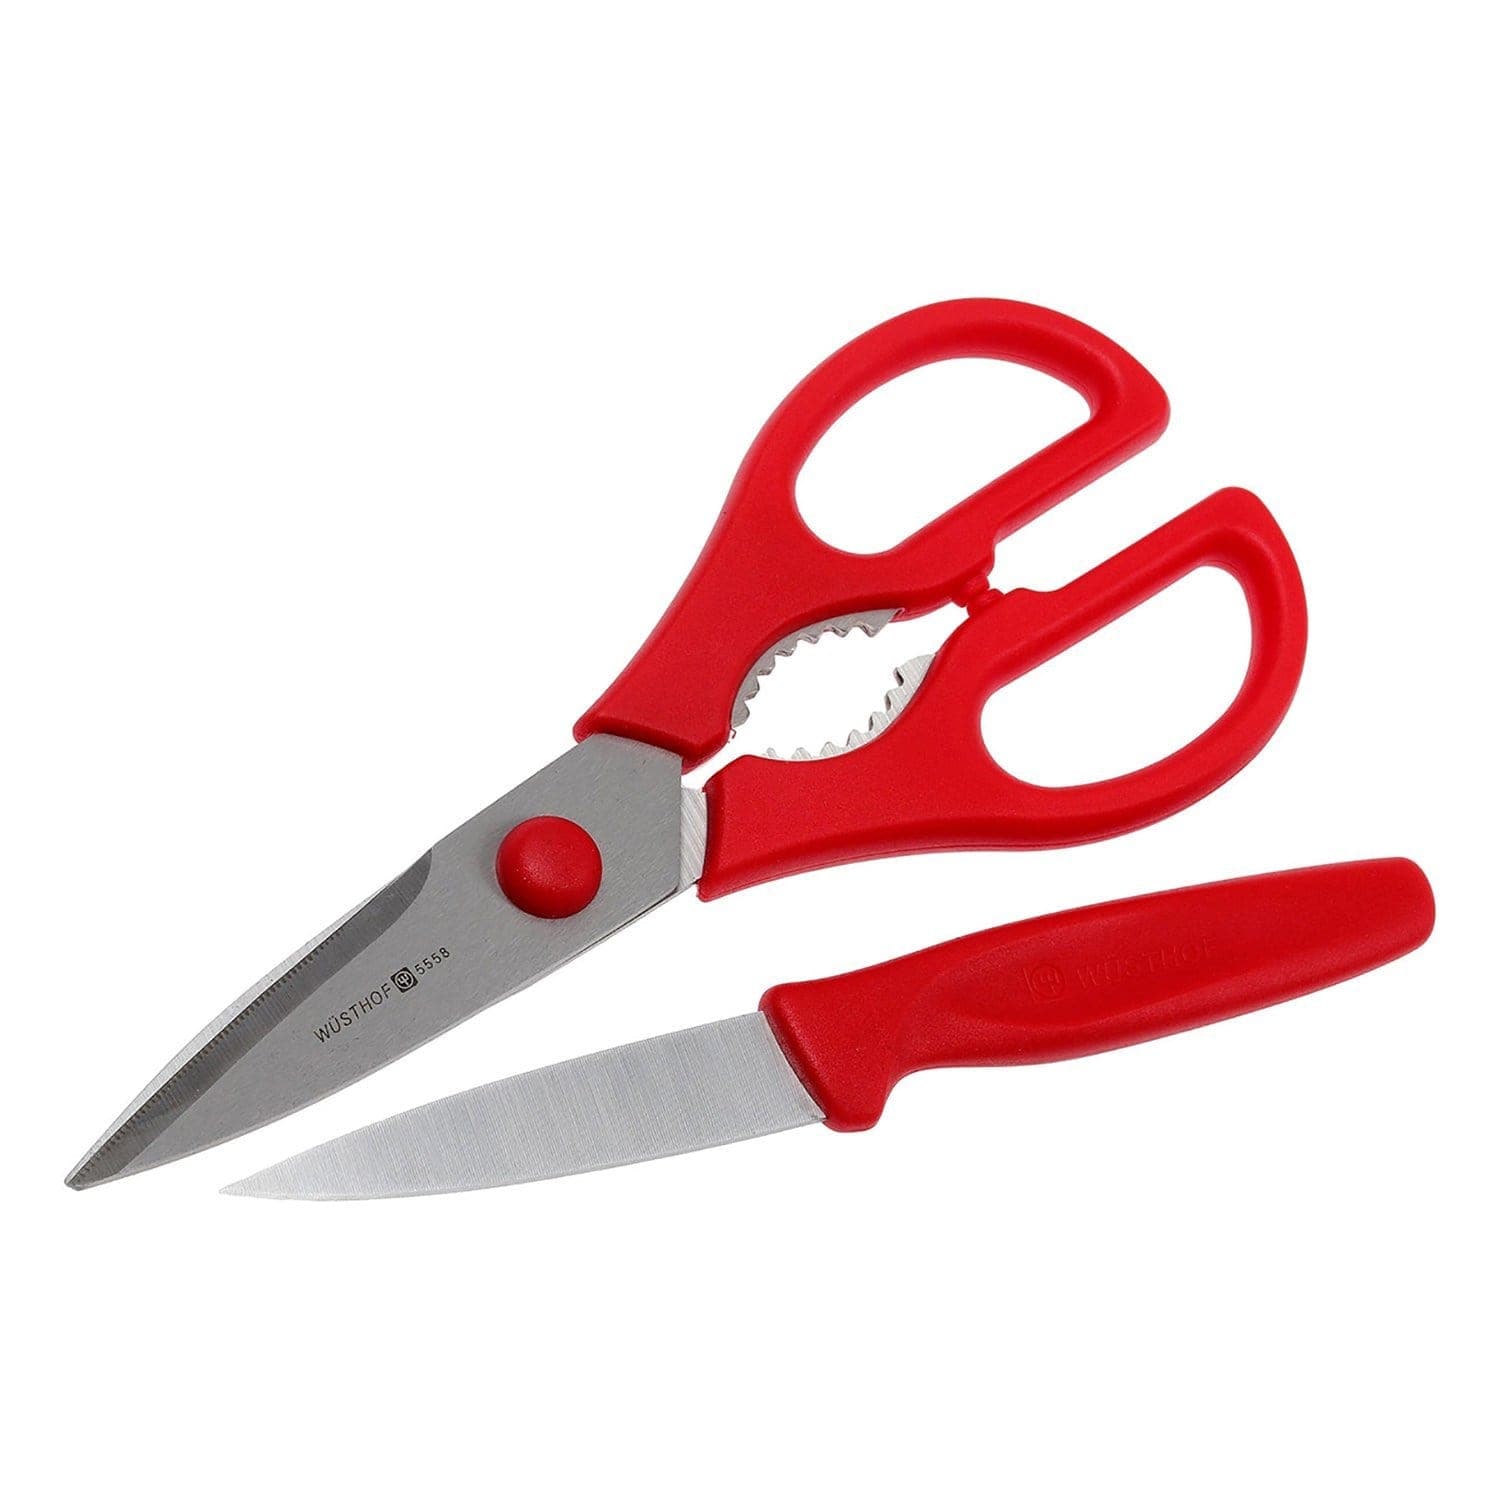 Wusthof Classic 2 Piece Knife and Scissor Kitchen Set - Red - 9354R - Jashanmal Home